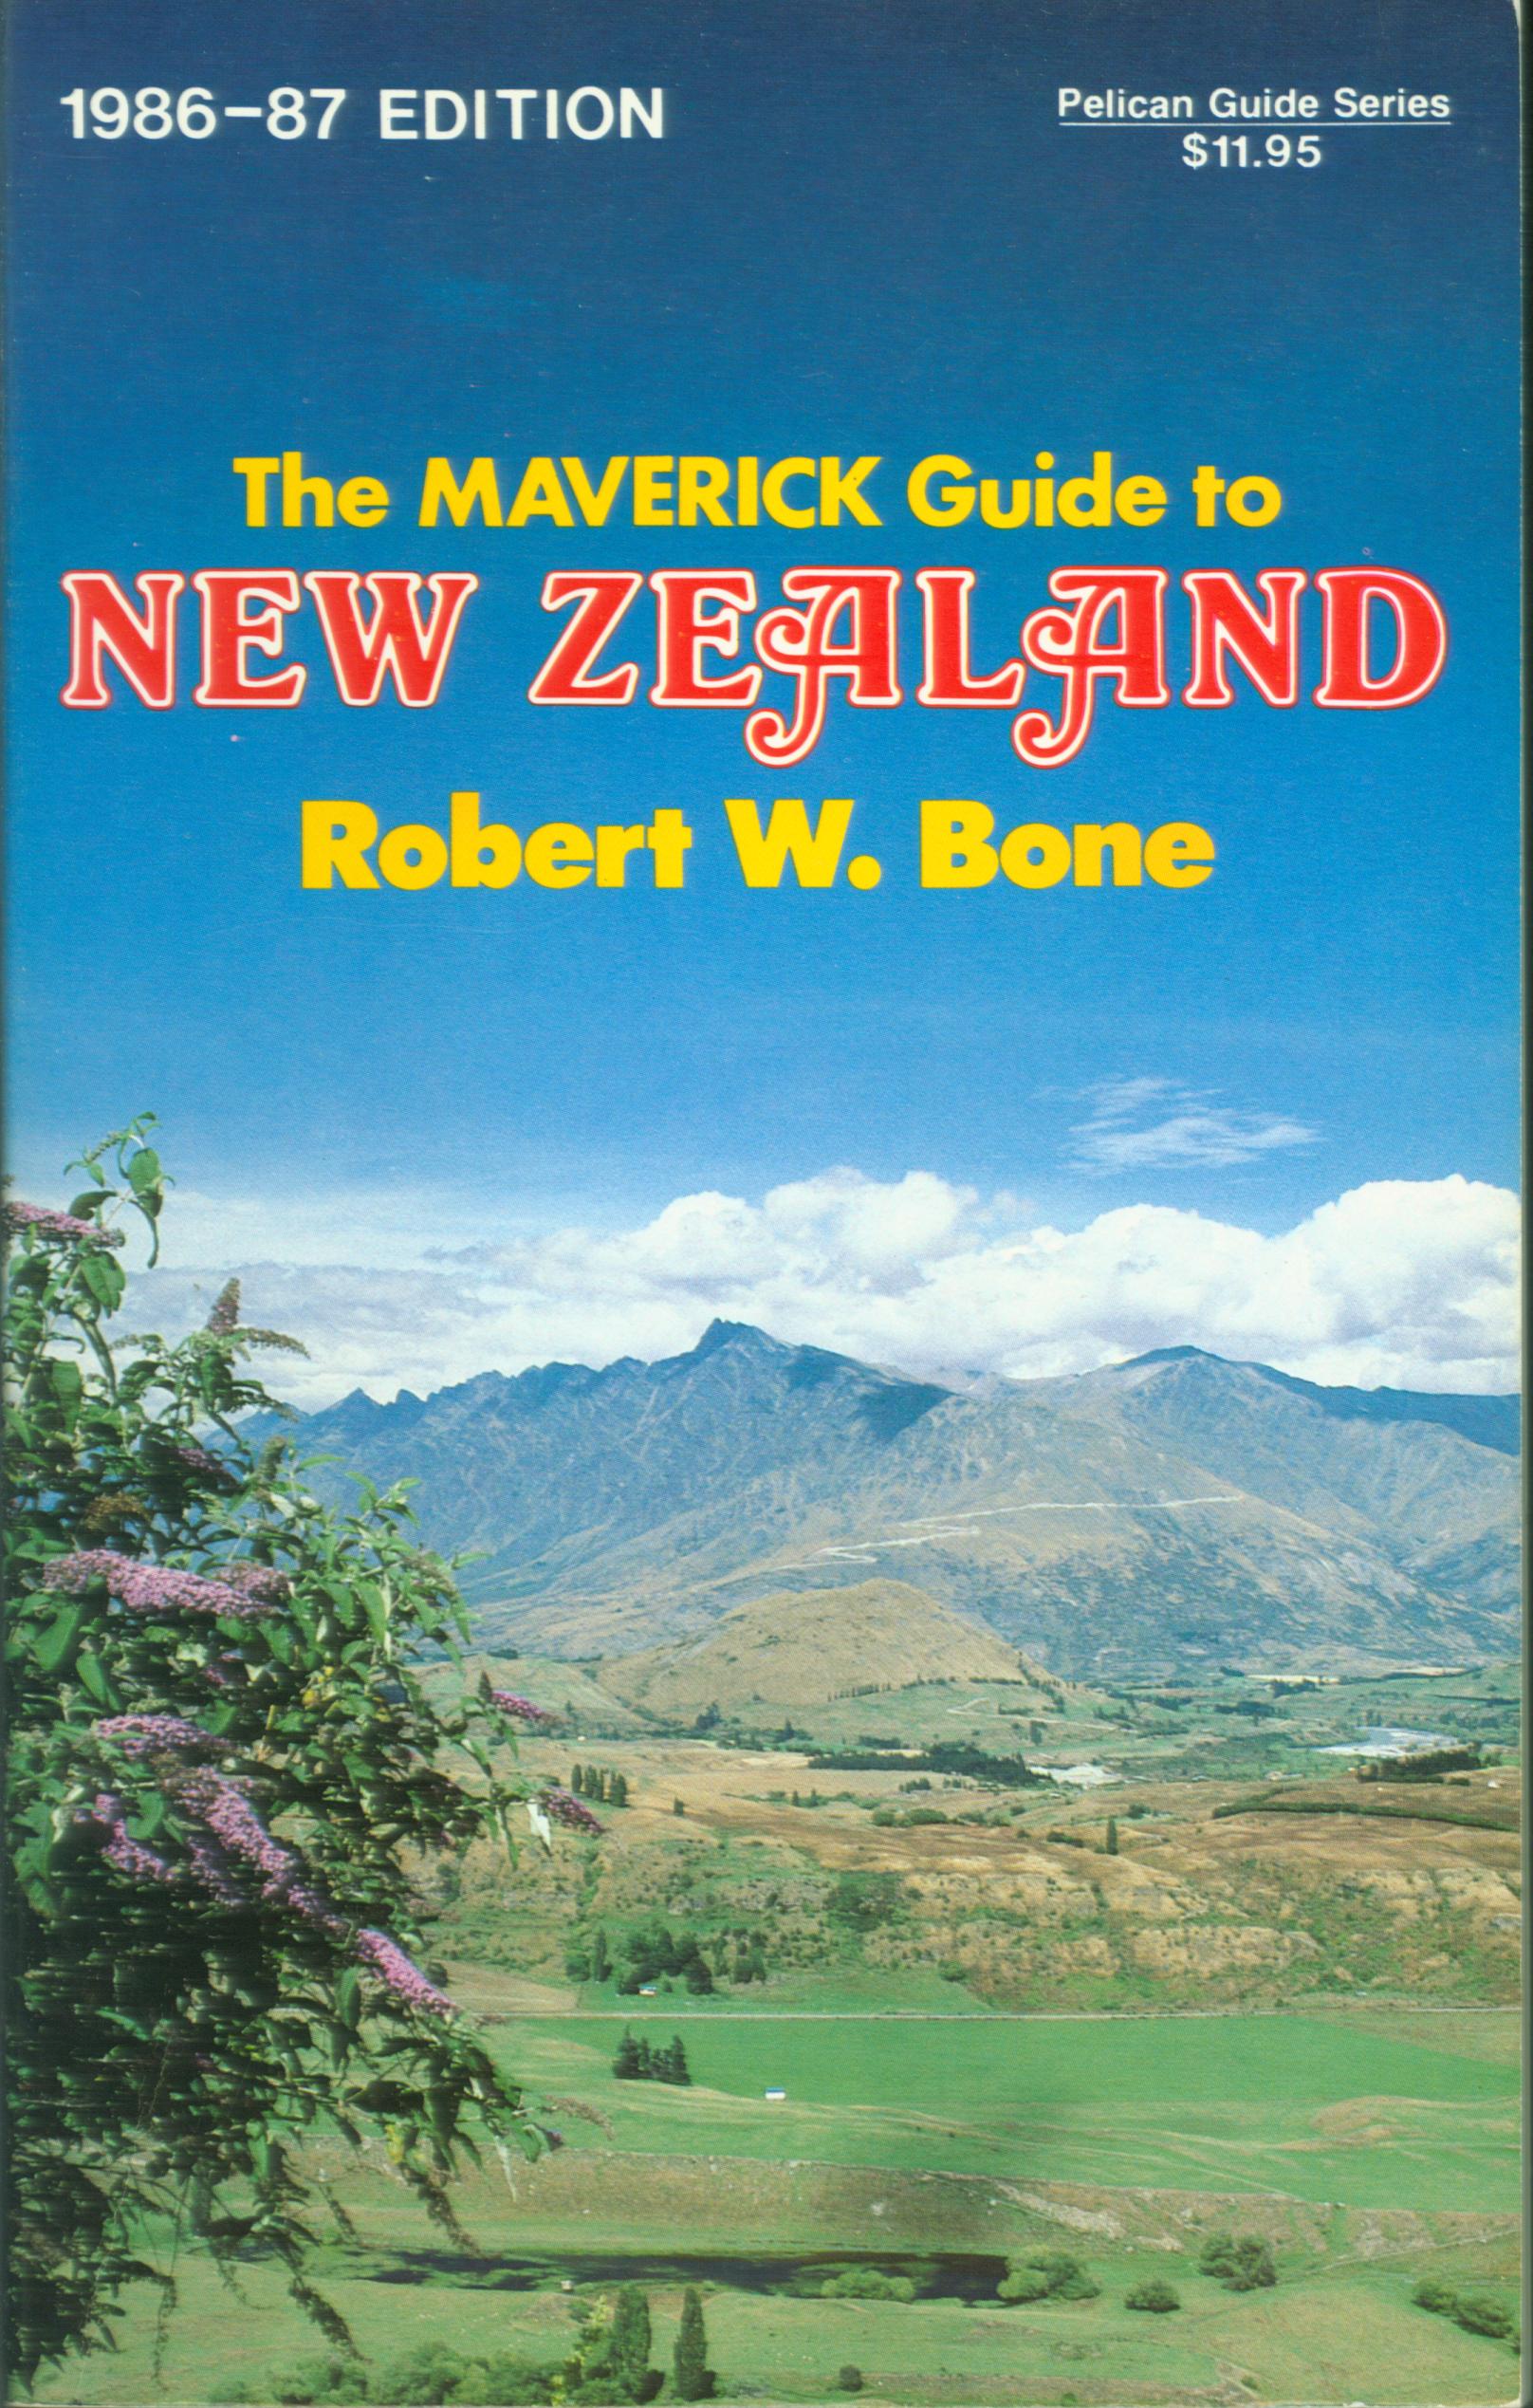 THE MAVERICK GUIDE TO NEW ZEALAND.